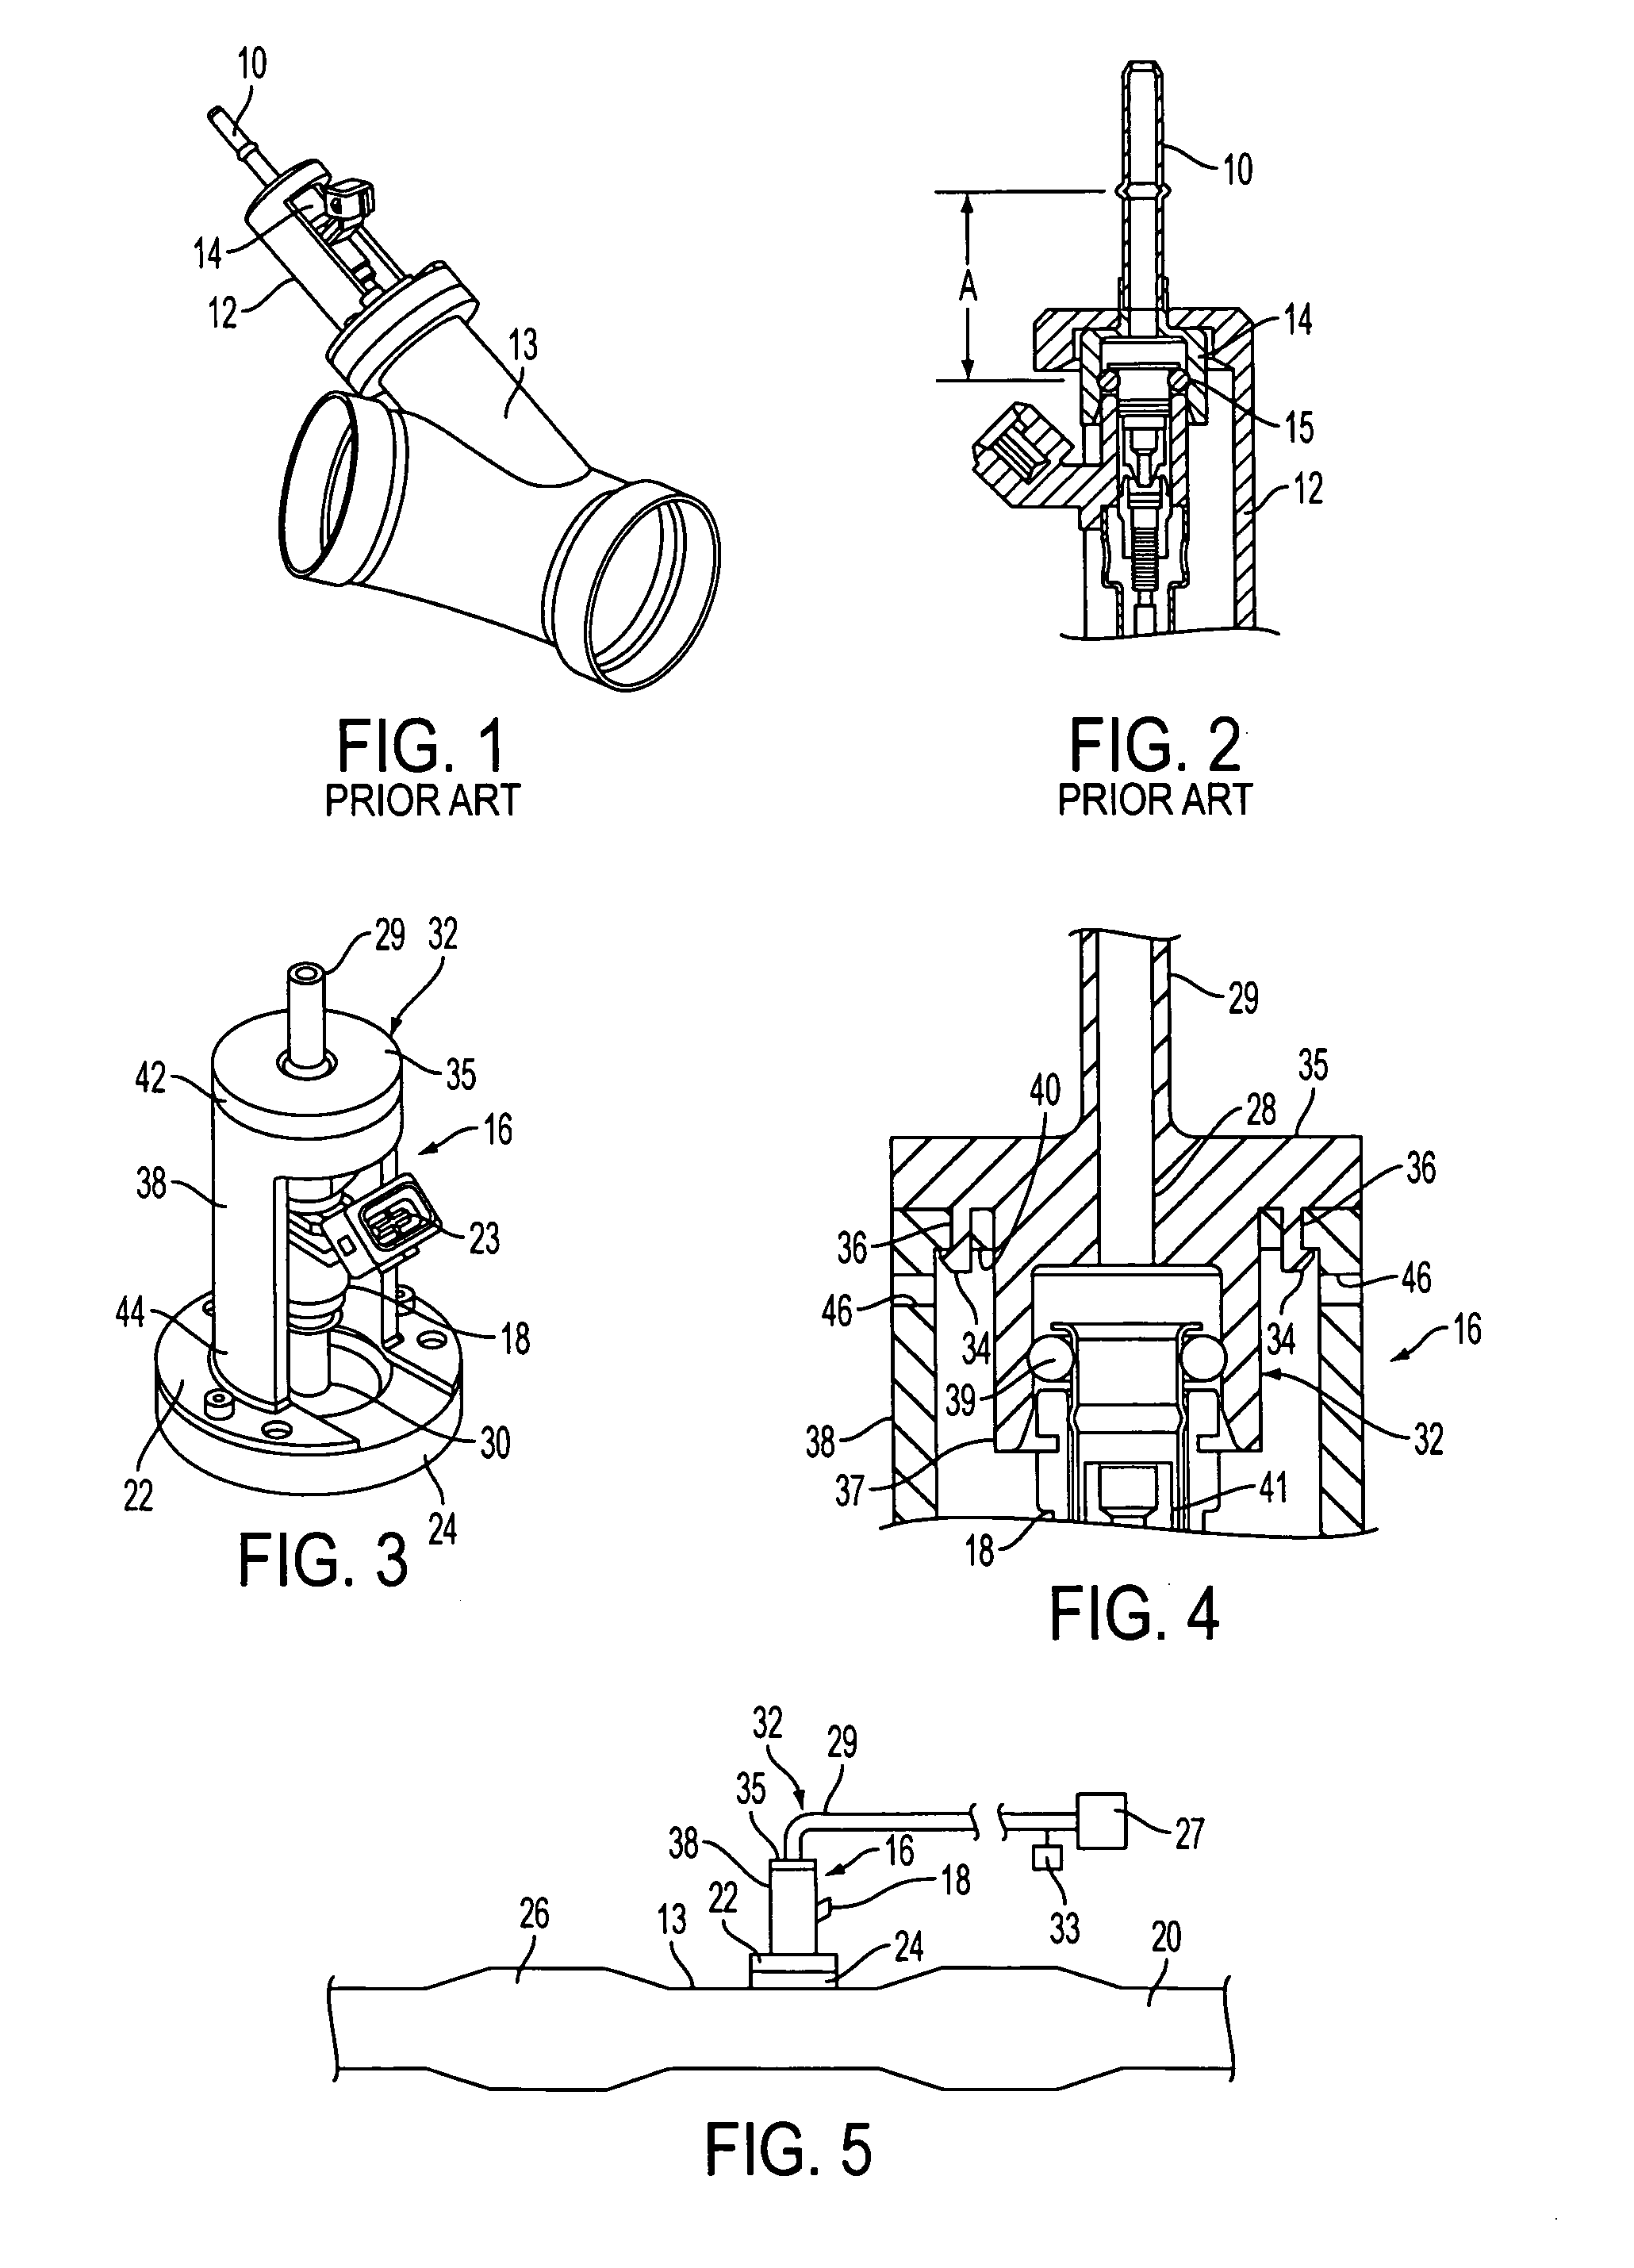 Fluid supply connection for reductant delivery unit for selective catalytic reduction systems